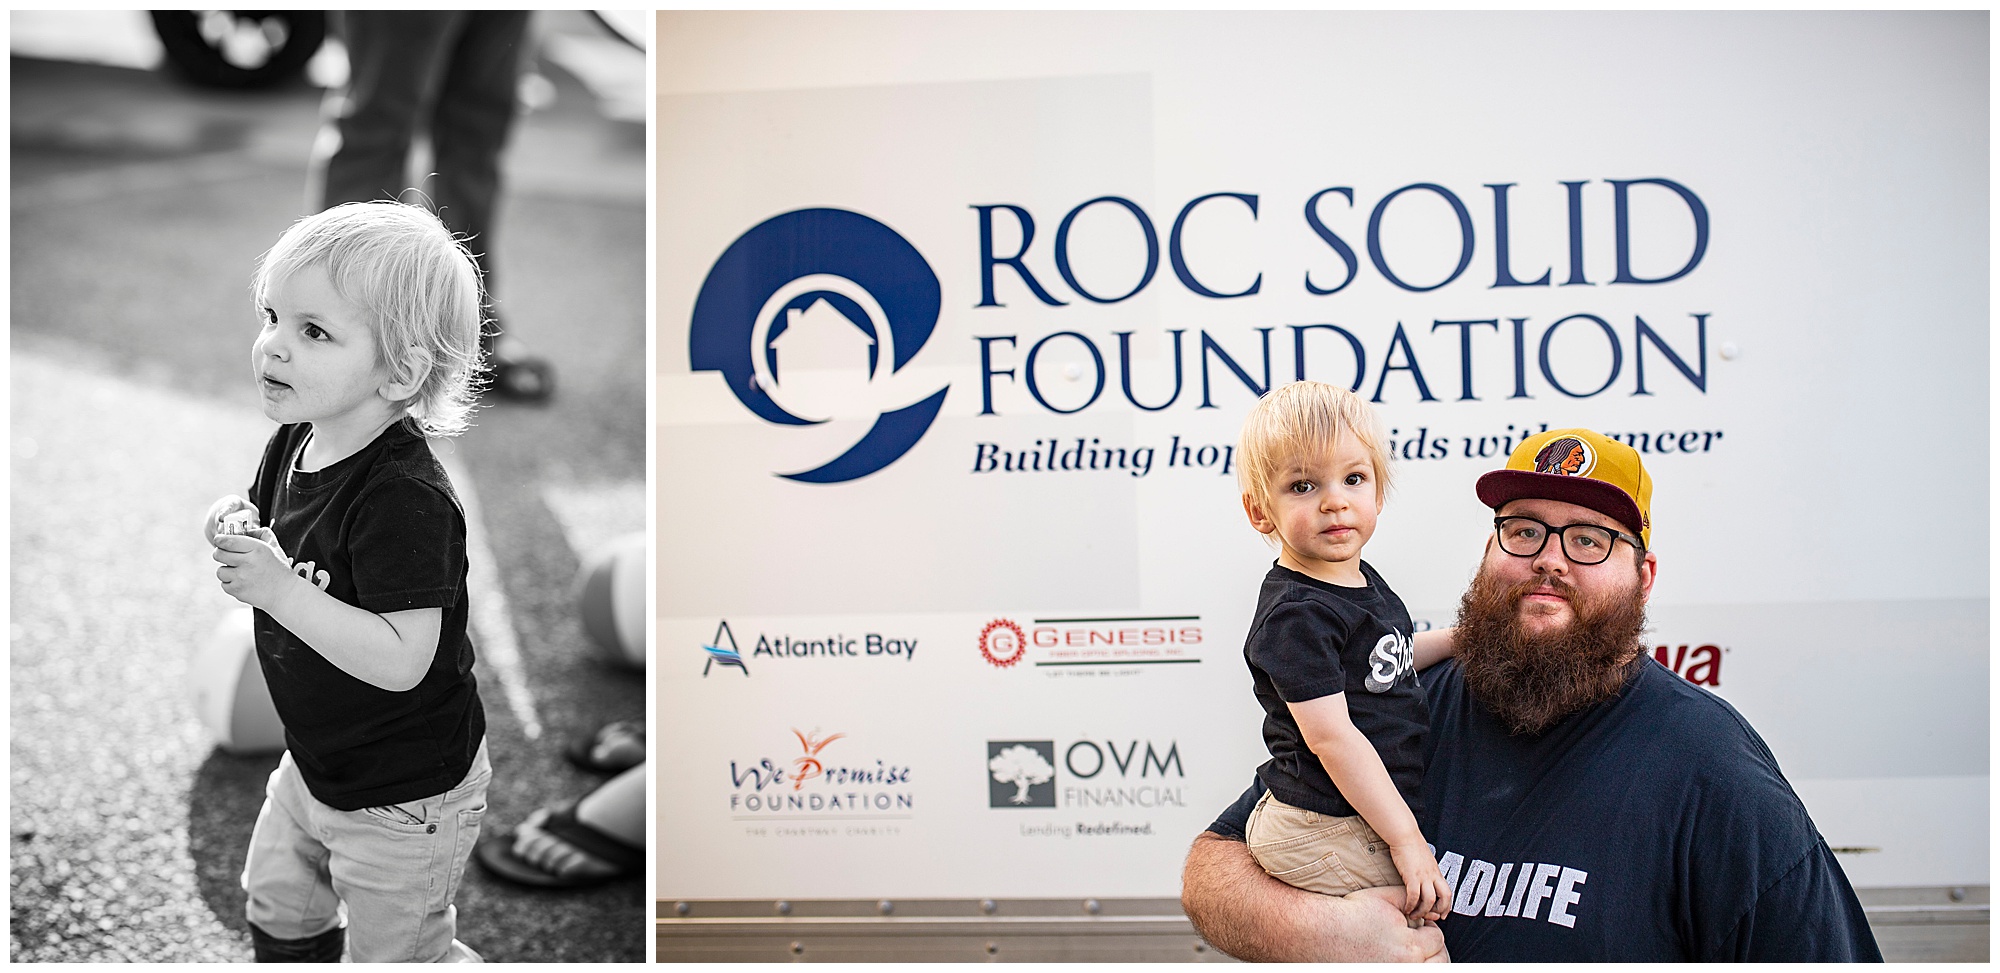 roc solid foundation, roc solid foundation ready bags, misty saves the day, pediatric cancer help hampton roads